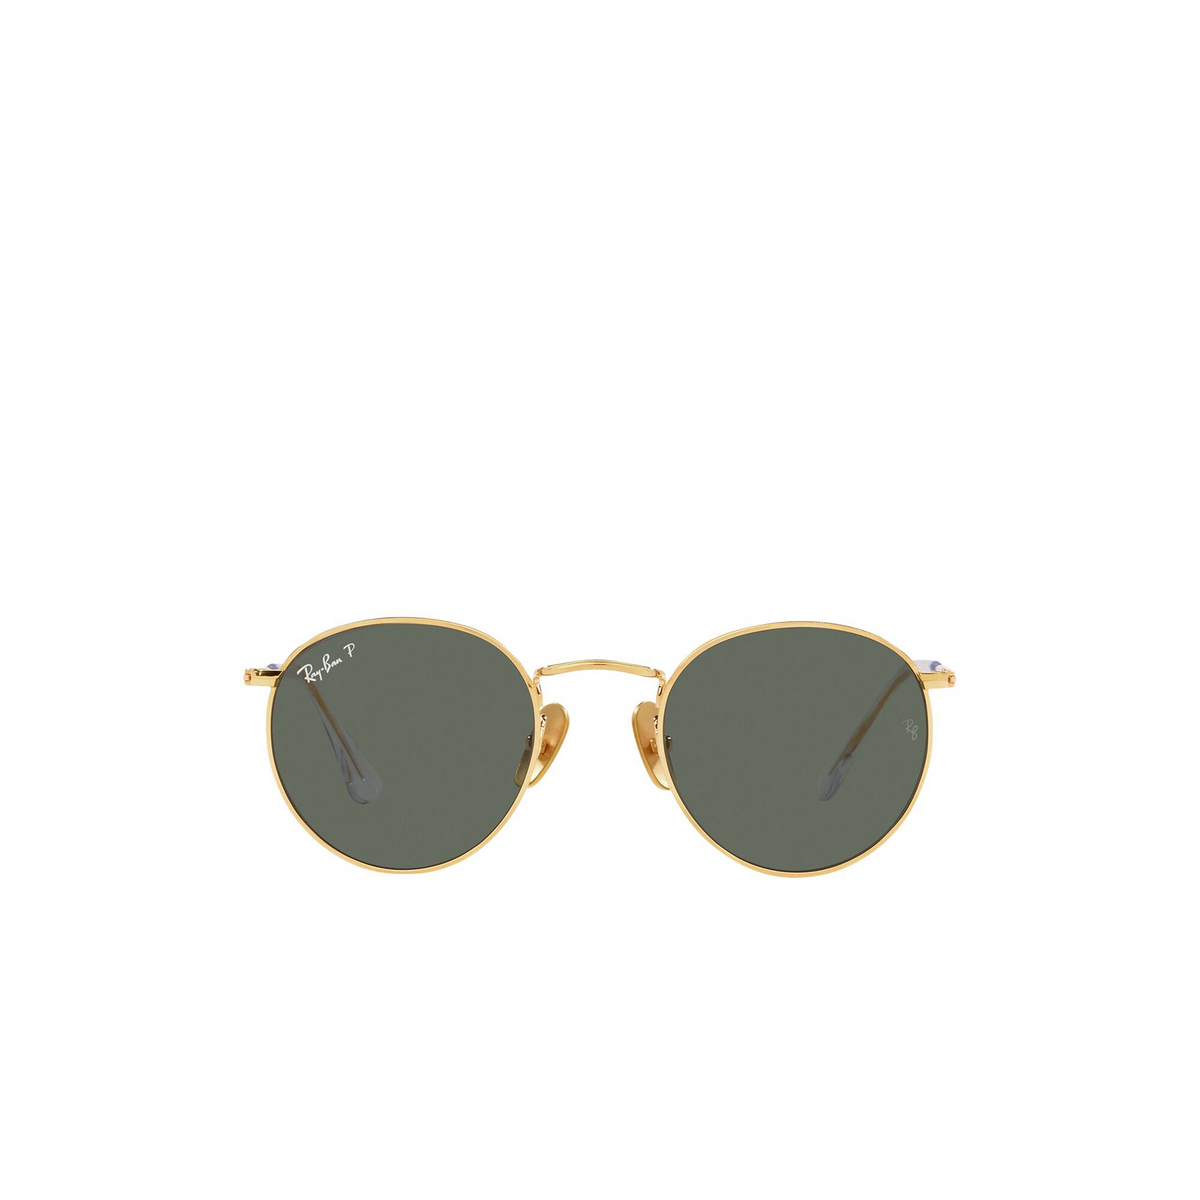 Ray-Ban RB8247 Sunglasses 921658 Legend Gold - front view